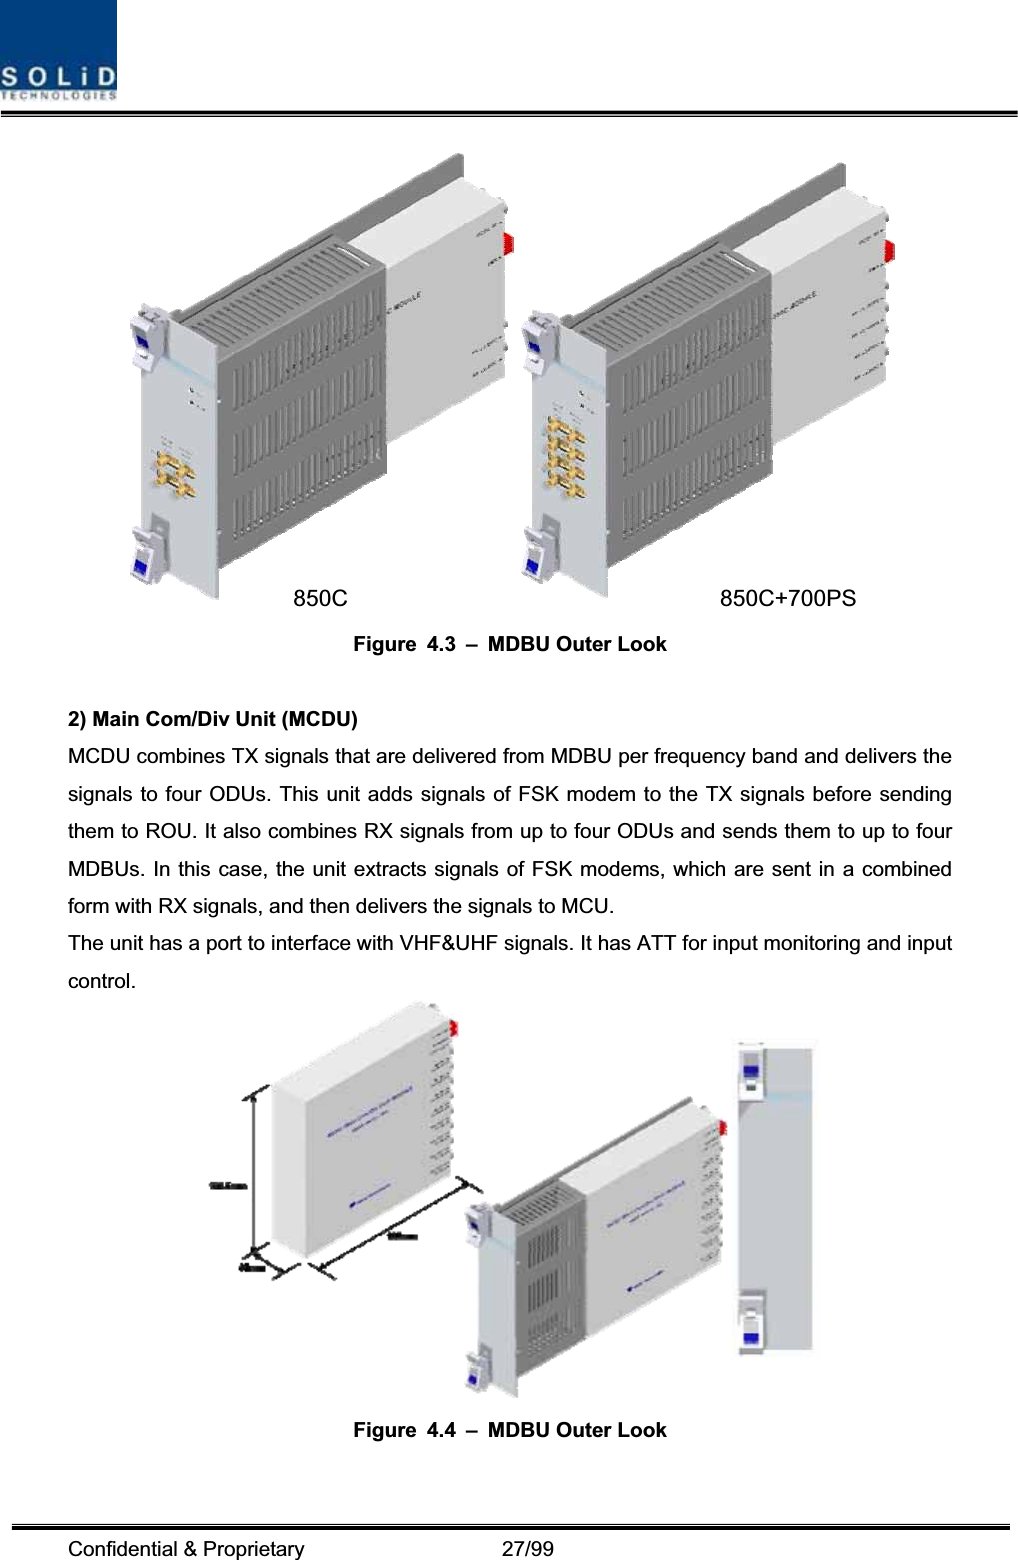 Confidential &amp; Proprietary                   27/99 Figure 4.3 – MDBU Outer Look 2) Main Com/Div Unit (MCDU) MCDU combines TX signals that are delivered from MDBU per frequency band and delivers the signals to four ODUs. This unit adds signals of FSK modem to the TX signals before sending them to ROU. It also combines RX signals from up to four ODUs and sends them to up to four MDBUs. In this case, the unit extracts signals of FSK modems, which are sent in a combined form with RX signals, and then delivers the signals to MCU. The unit has a port to interface with VHF&amp;UHF signals. It has ATT for input monitoring and input control.Figure 4.4 – MDBU Outer Look 850C 850C+700PS 